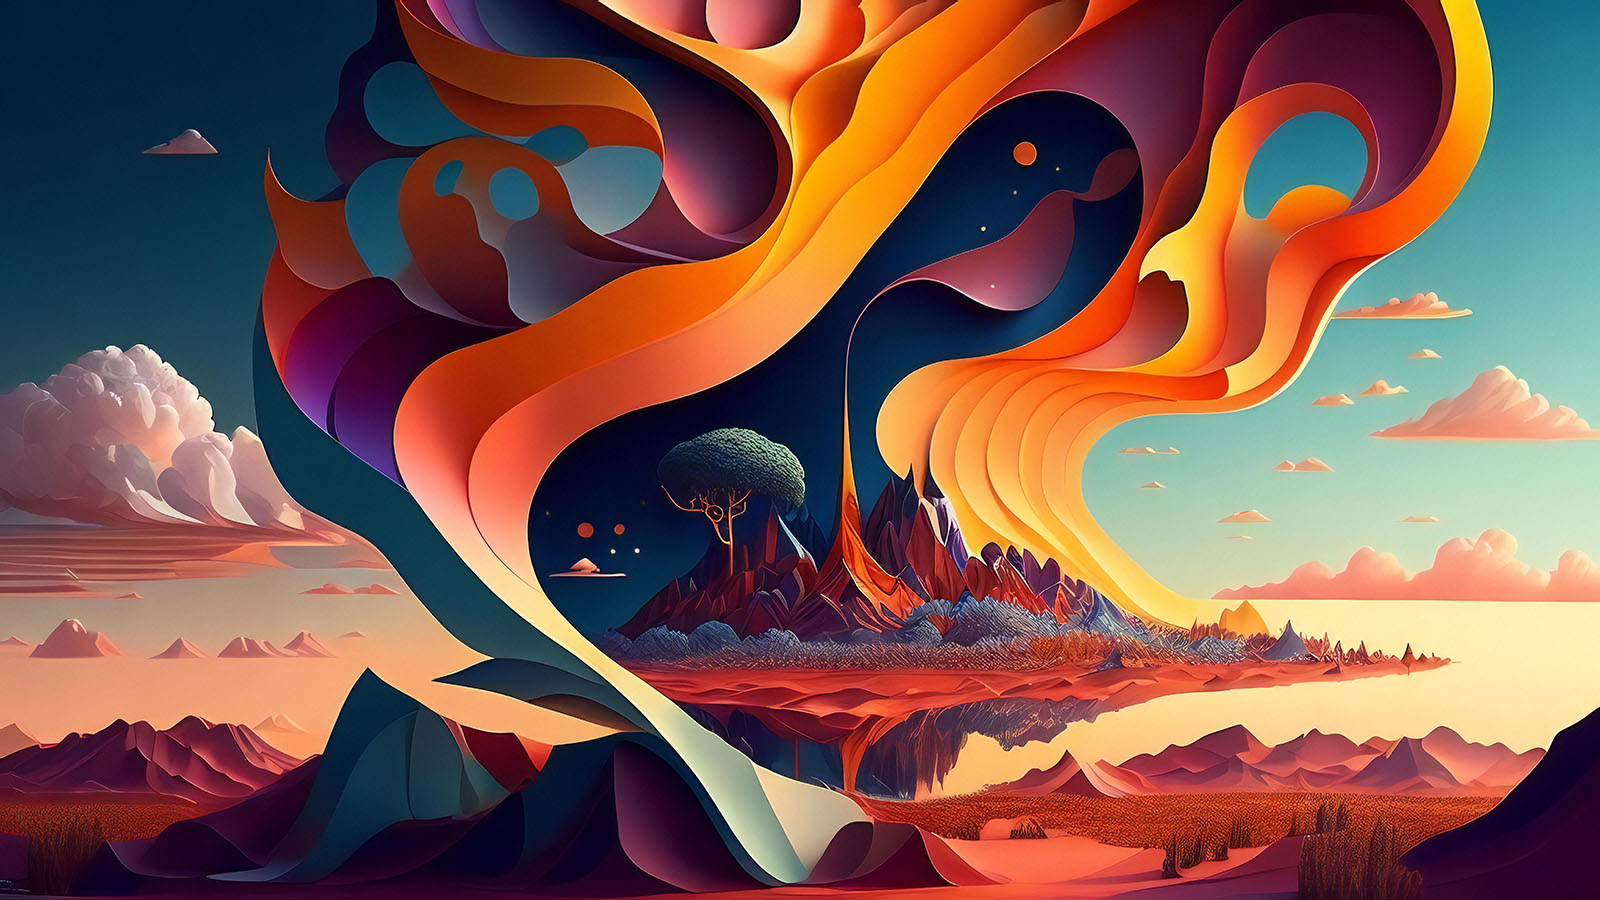 Abstract and Dreamy Illustrations